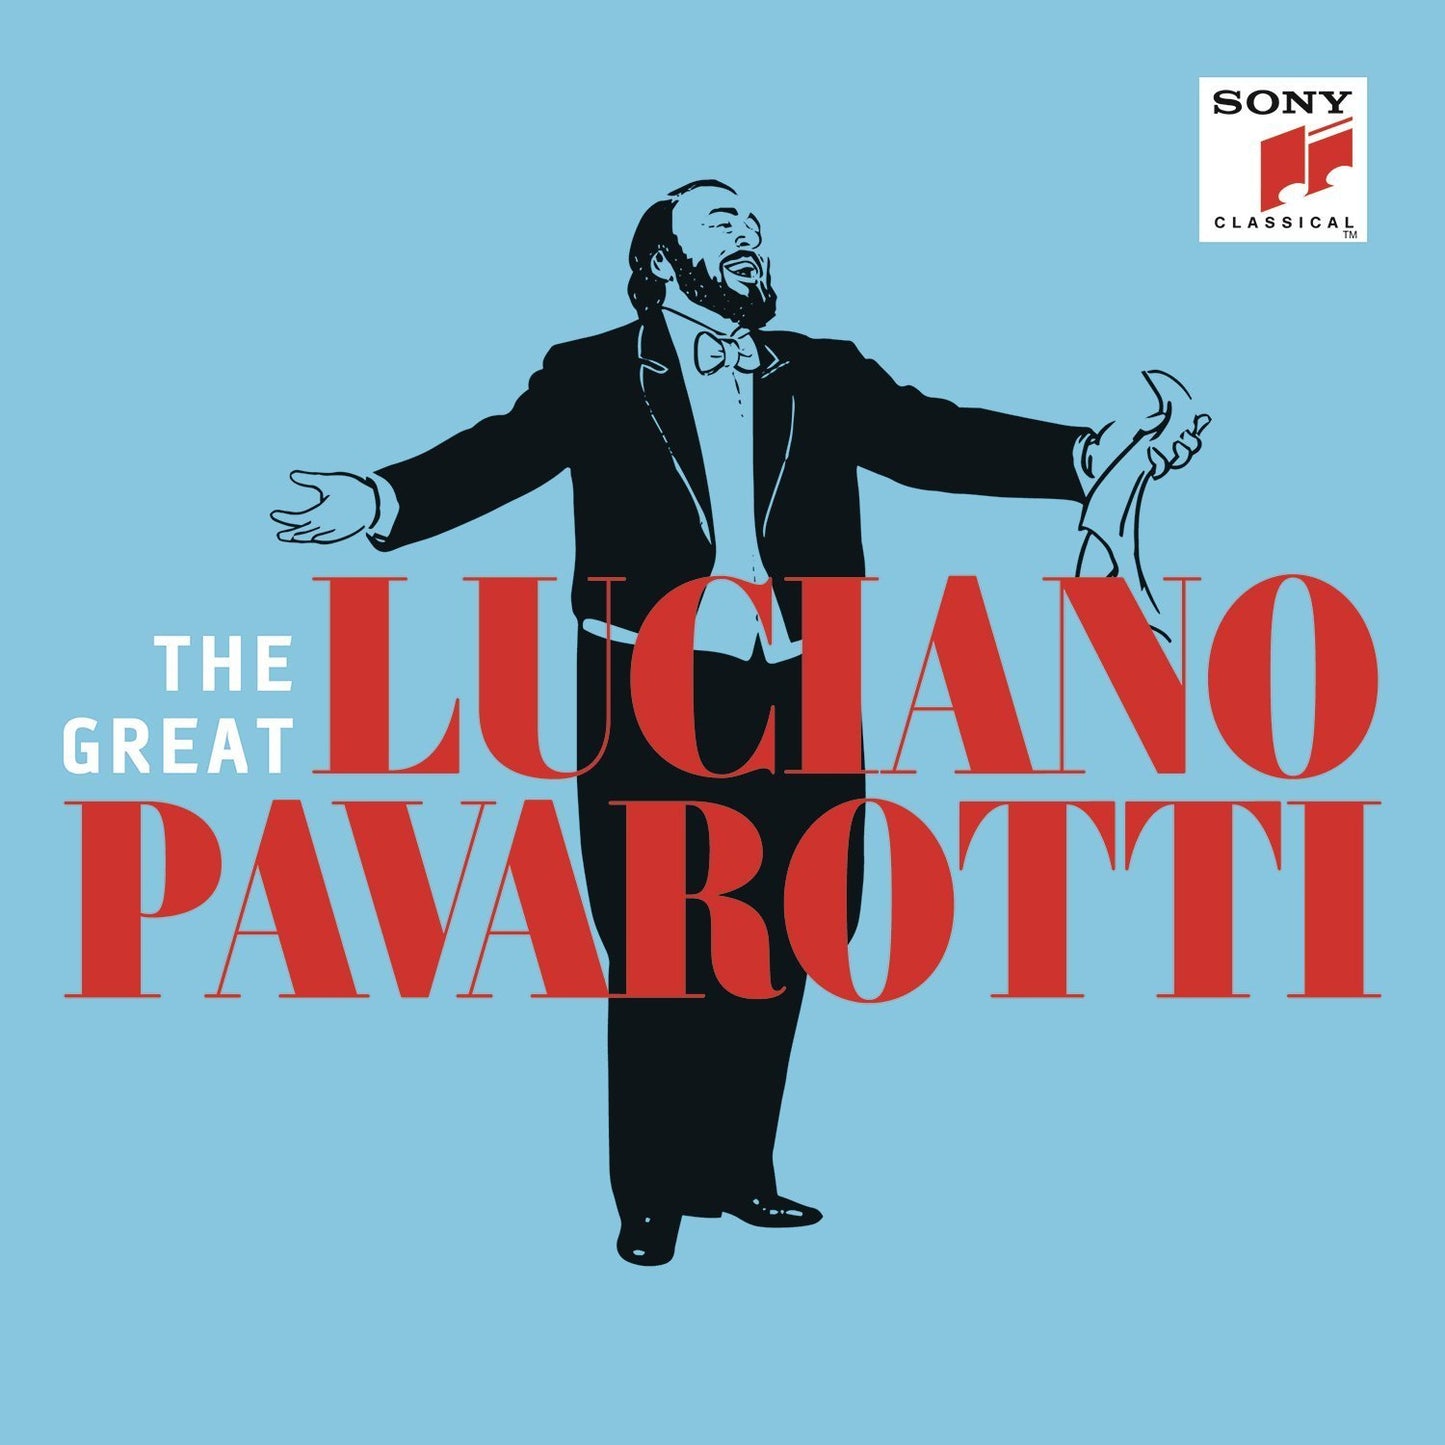 THE GREAT LUCIANO PAVAROTTI (3 CDs)